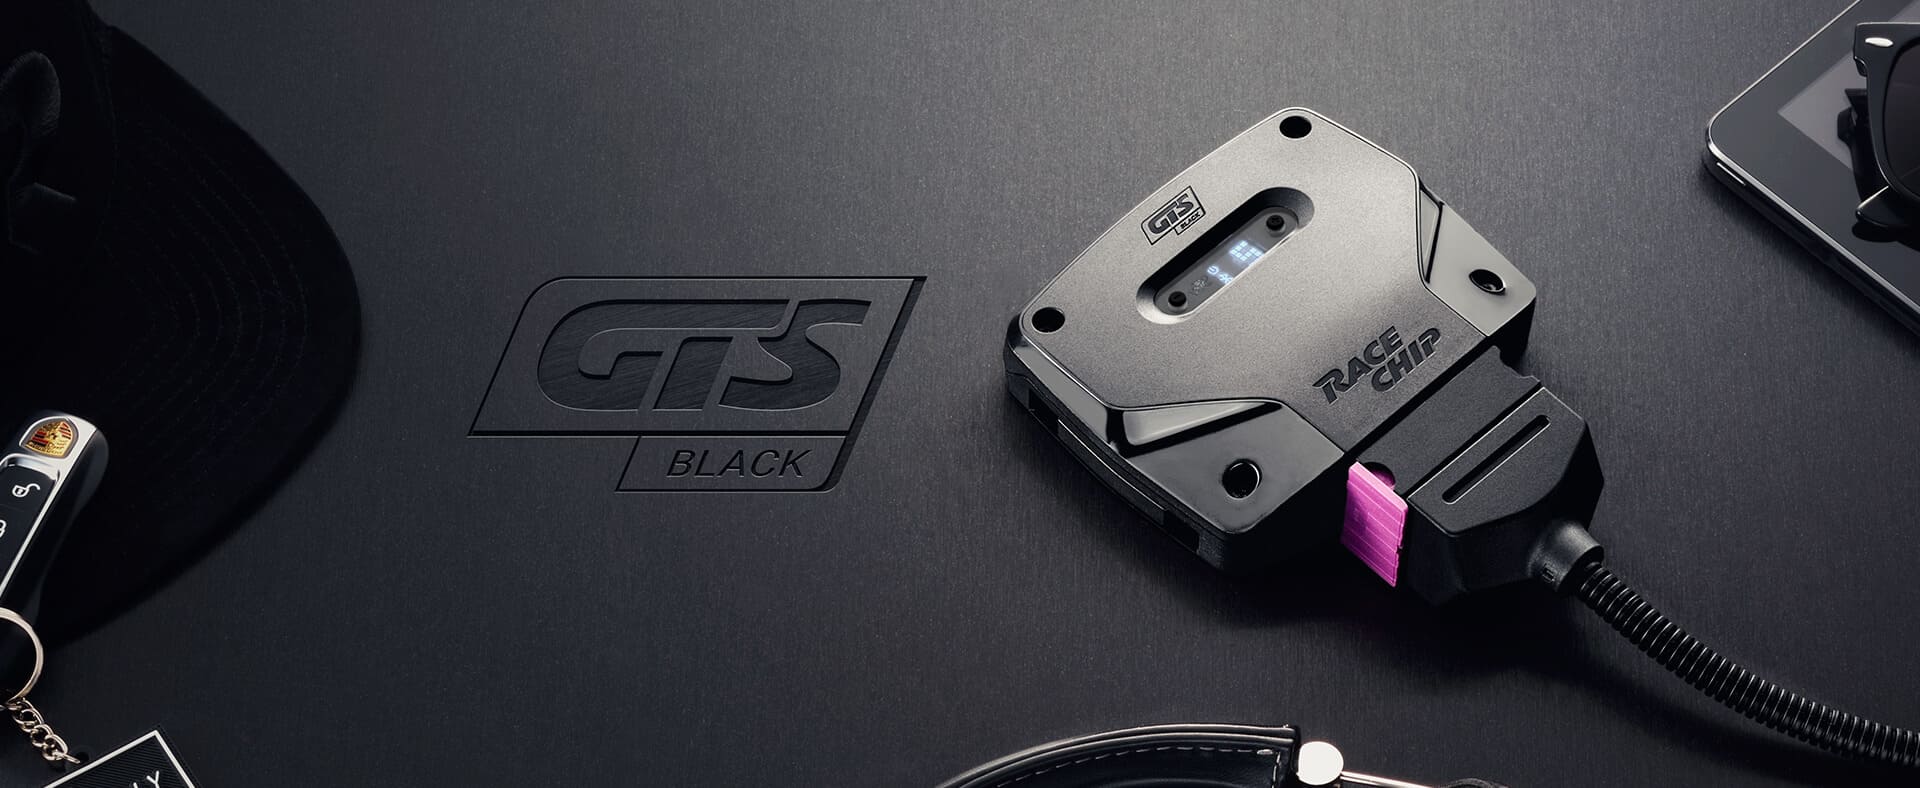 RaceChip GTS Black - the pinacle of box tuning